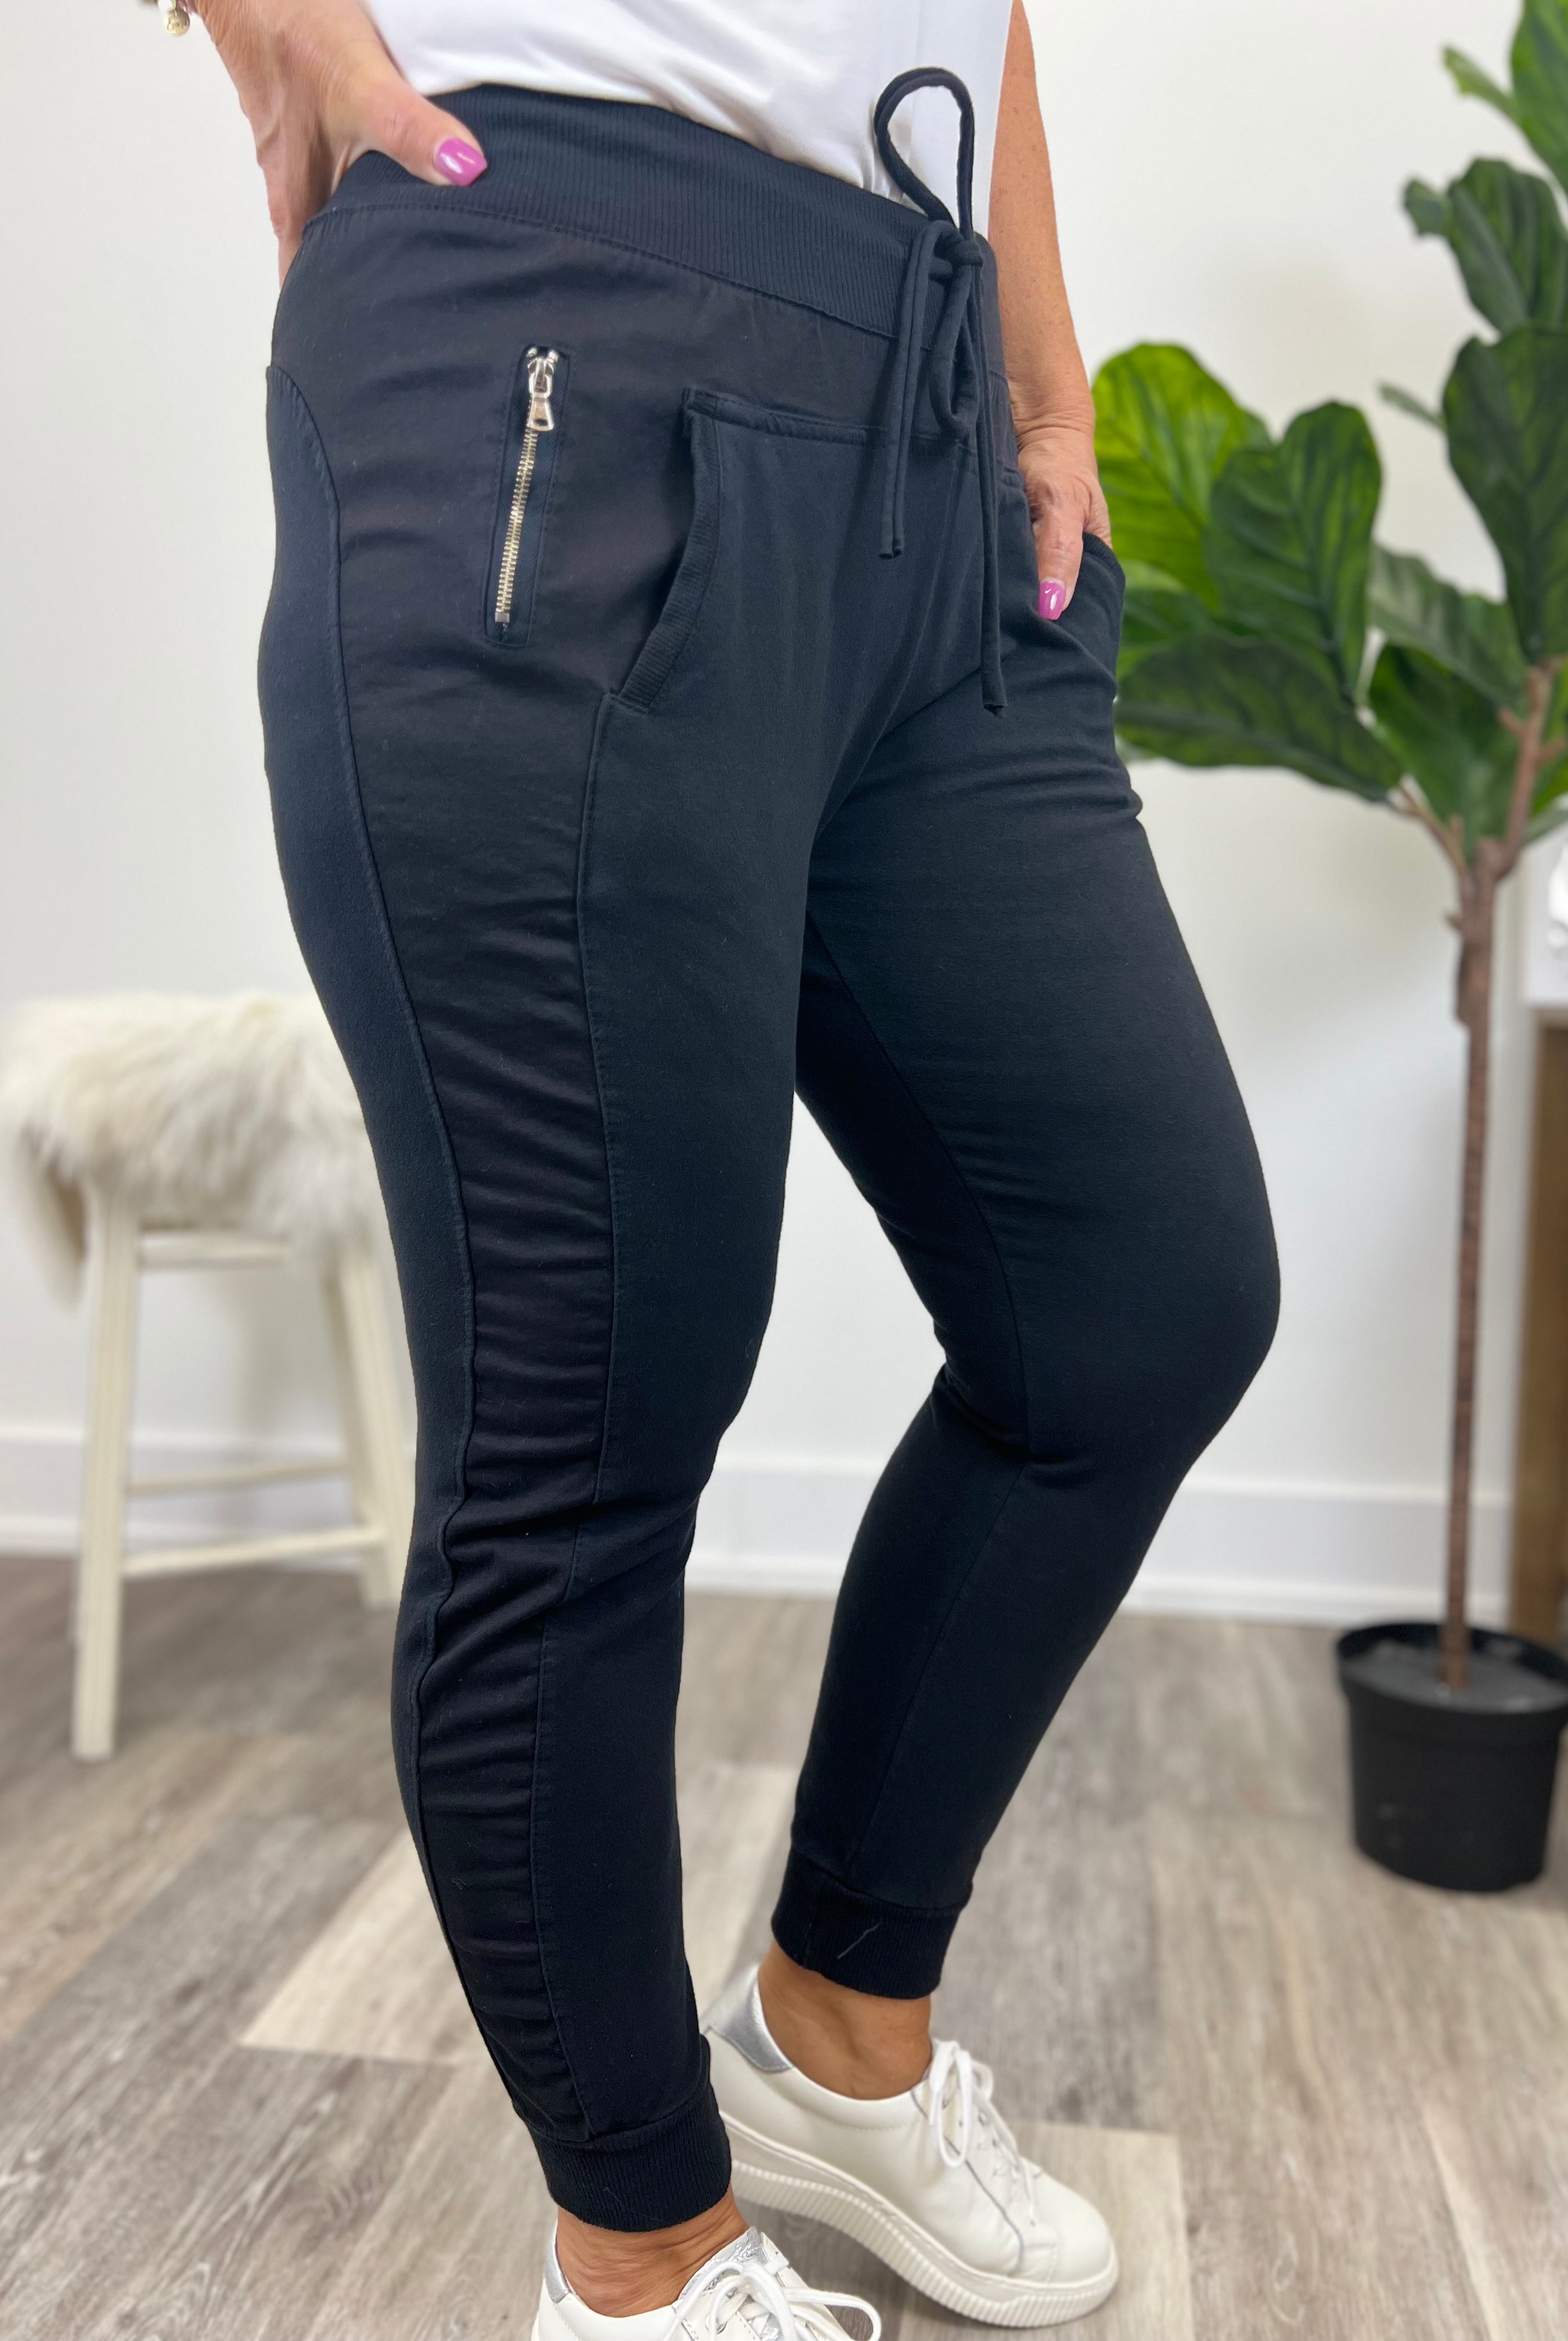 Mainstream Boutique Stillwater Women’s Ultimate Joggers